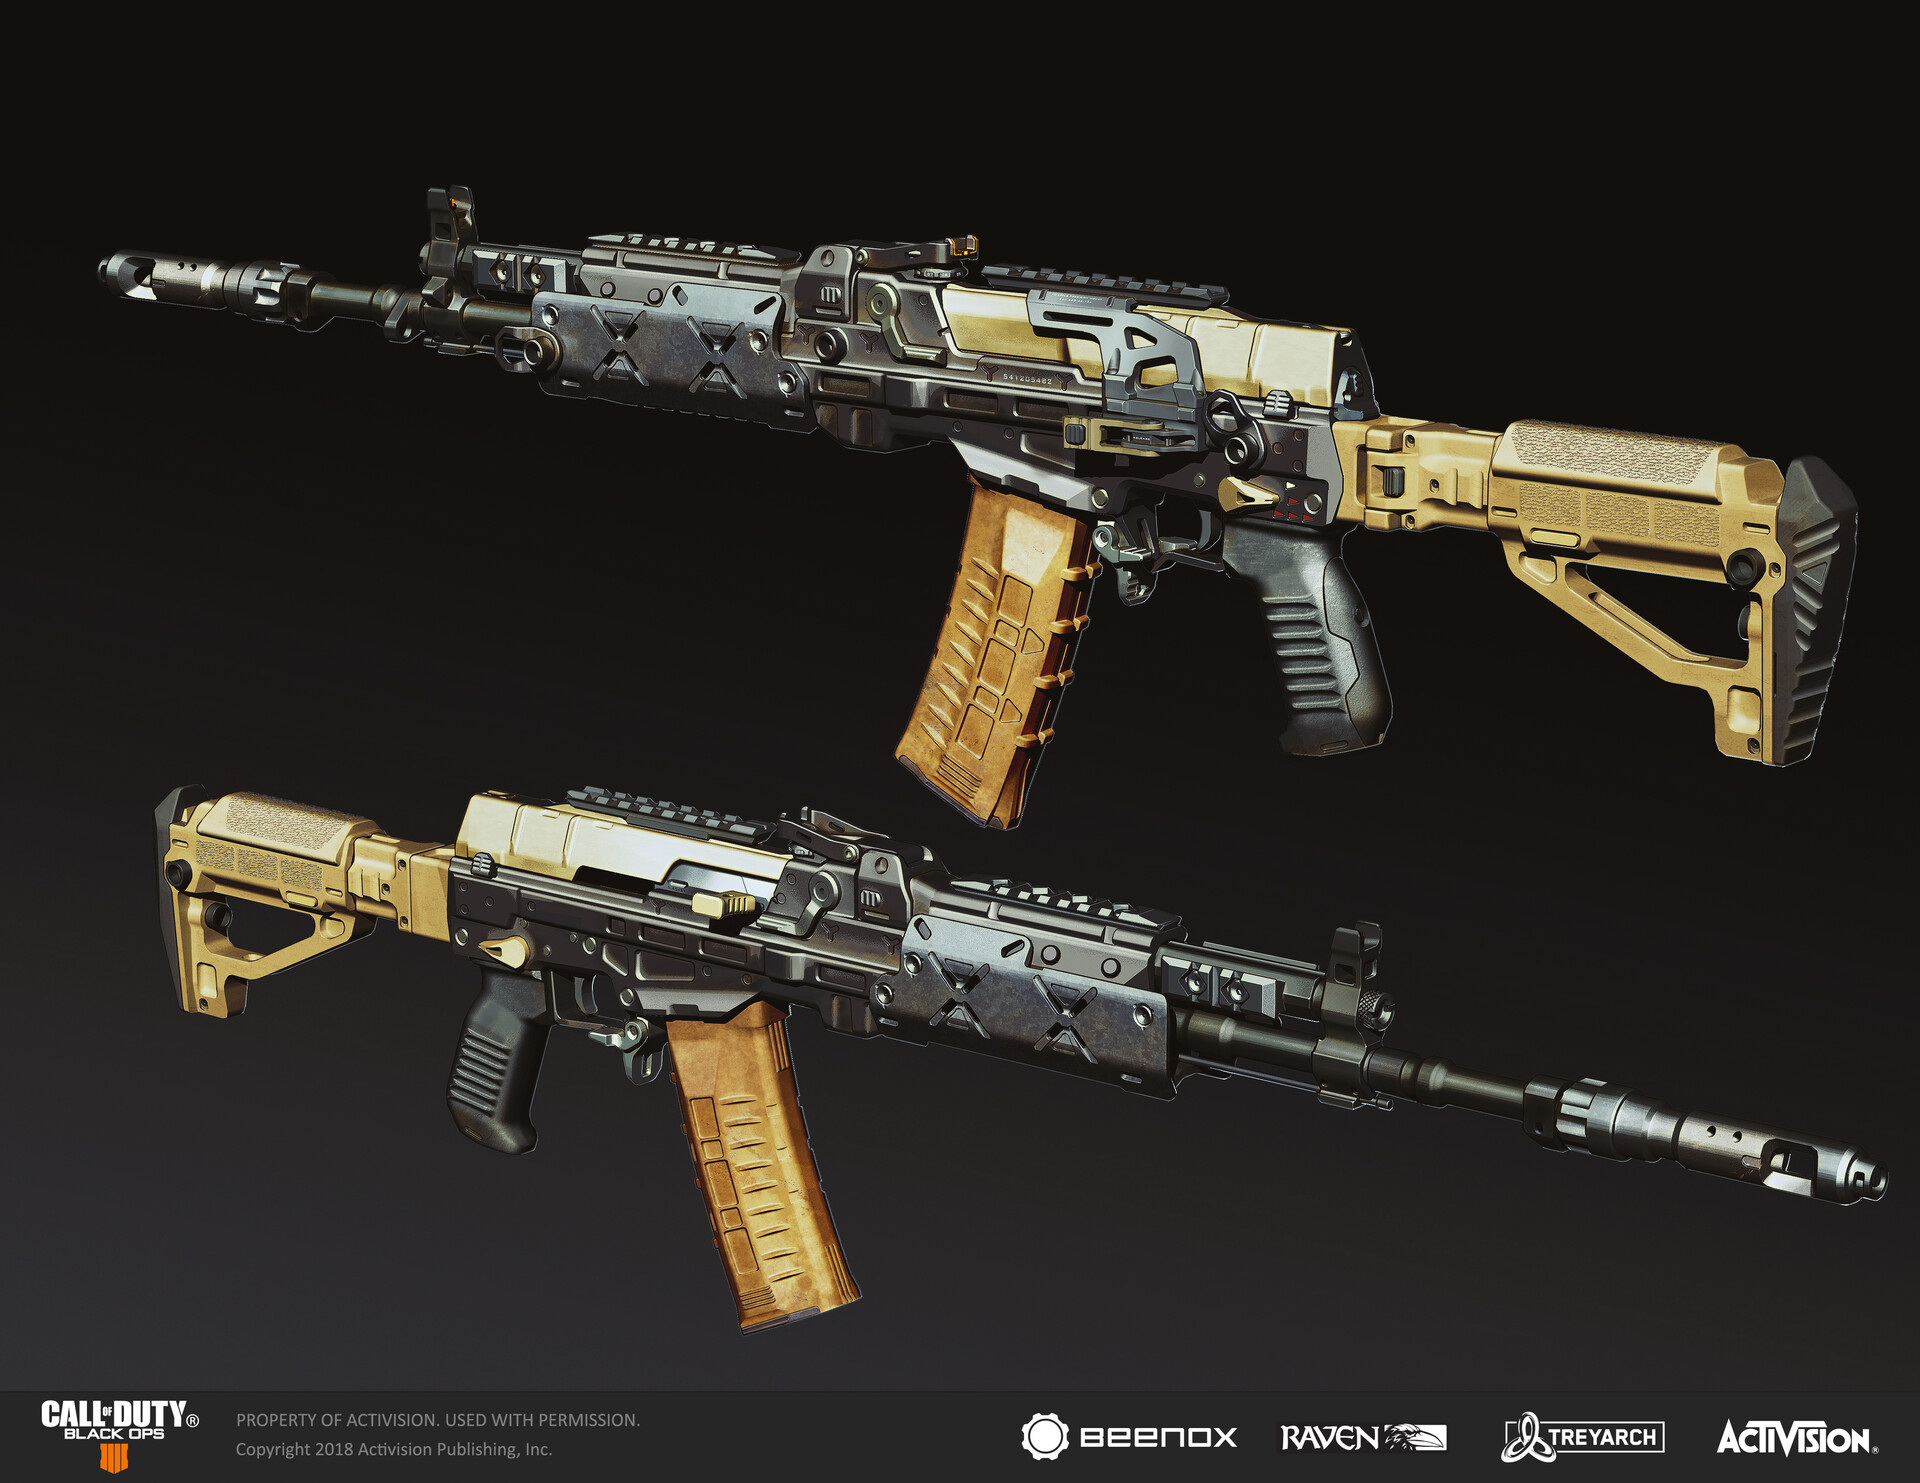 Call of Duty Black Ops 4 Weapon Concept KN-57 and full attachment kit.